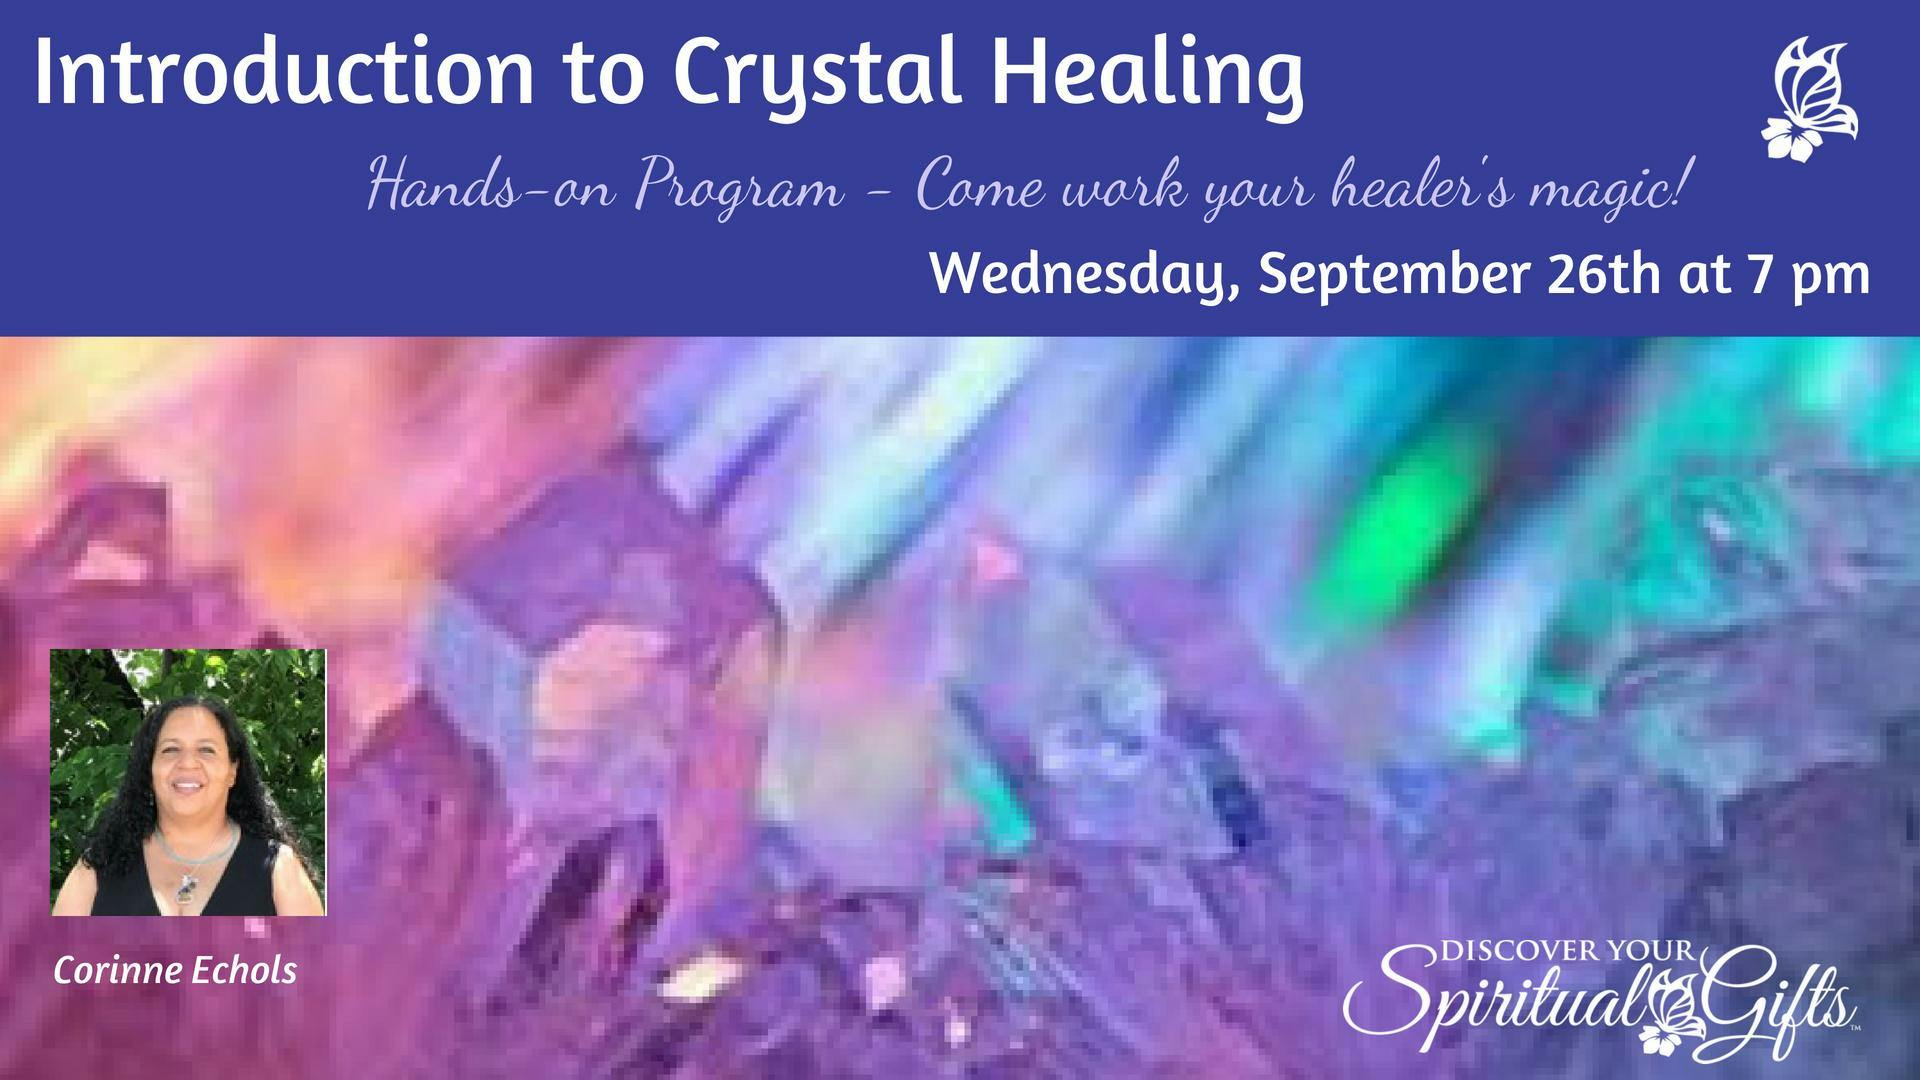 Introduction to Crystal Healing with Corinne